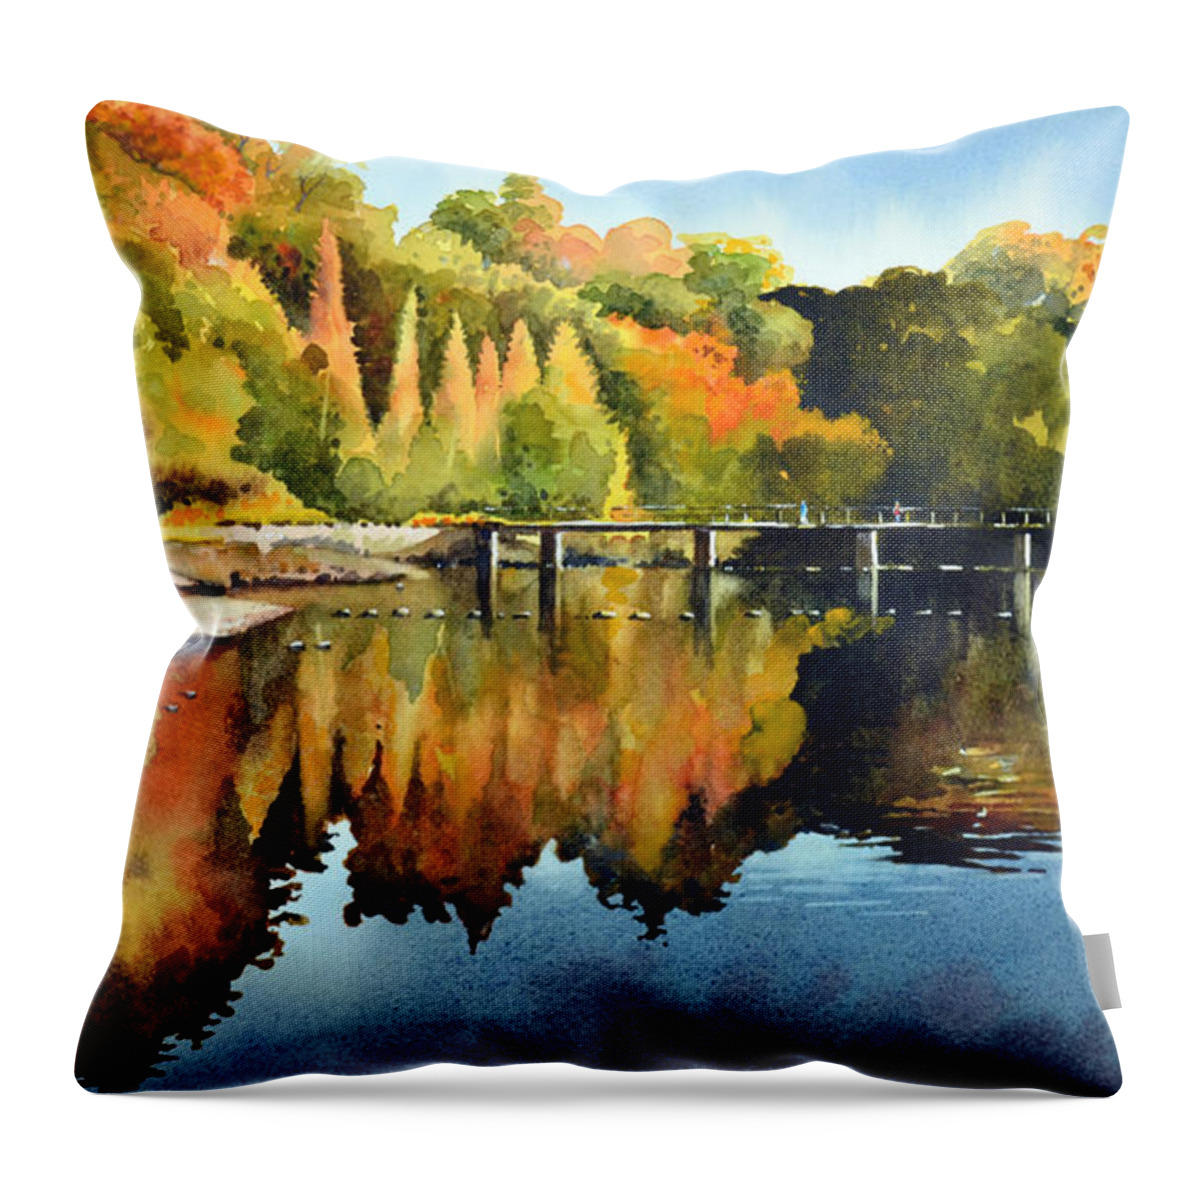 Bolton Abbey Throw Pillow featuring the painting Stepping Stones Bolton Abbey by Paul Dene Marlor